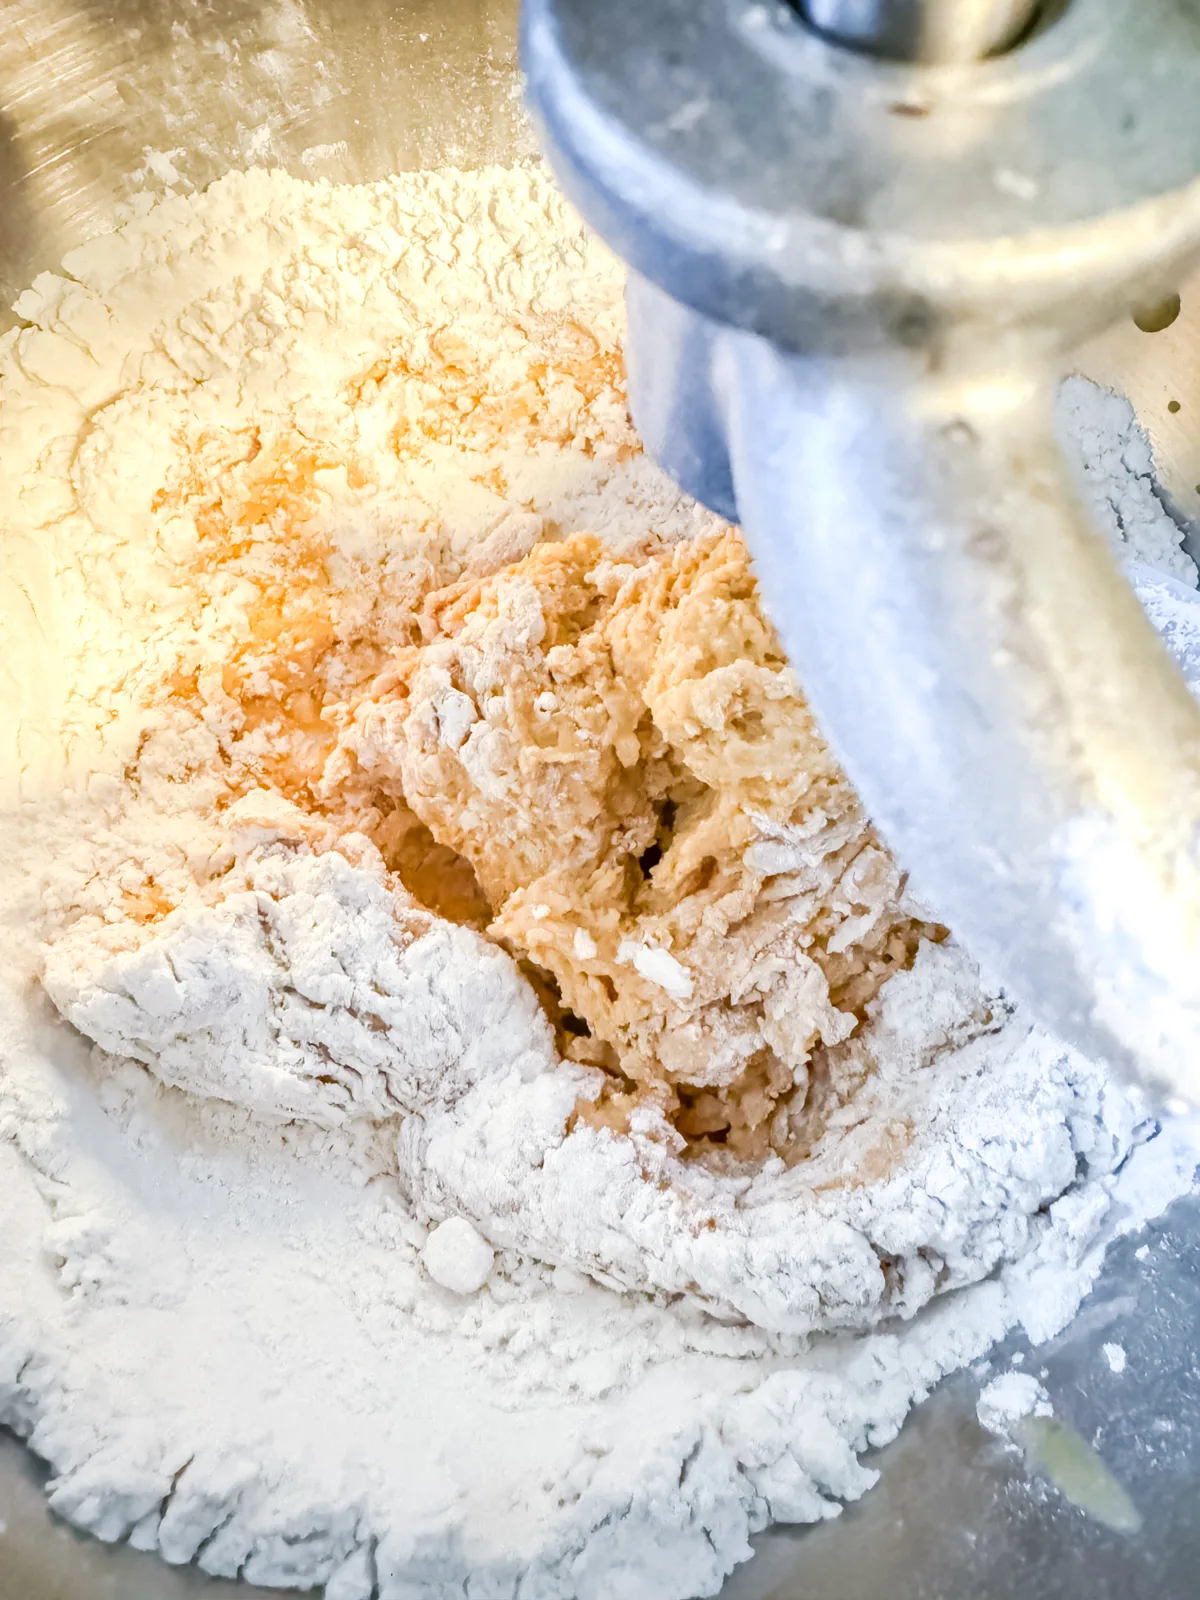 Mixing together flour, yeast, pumpkin mixture in a stand mixer.